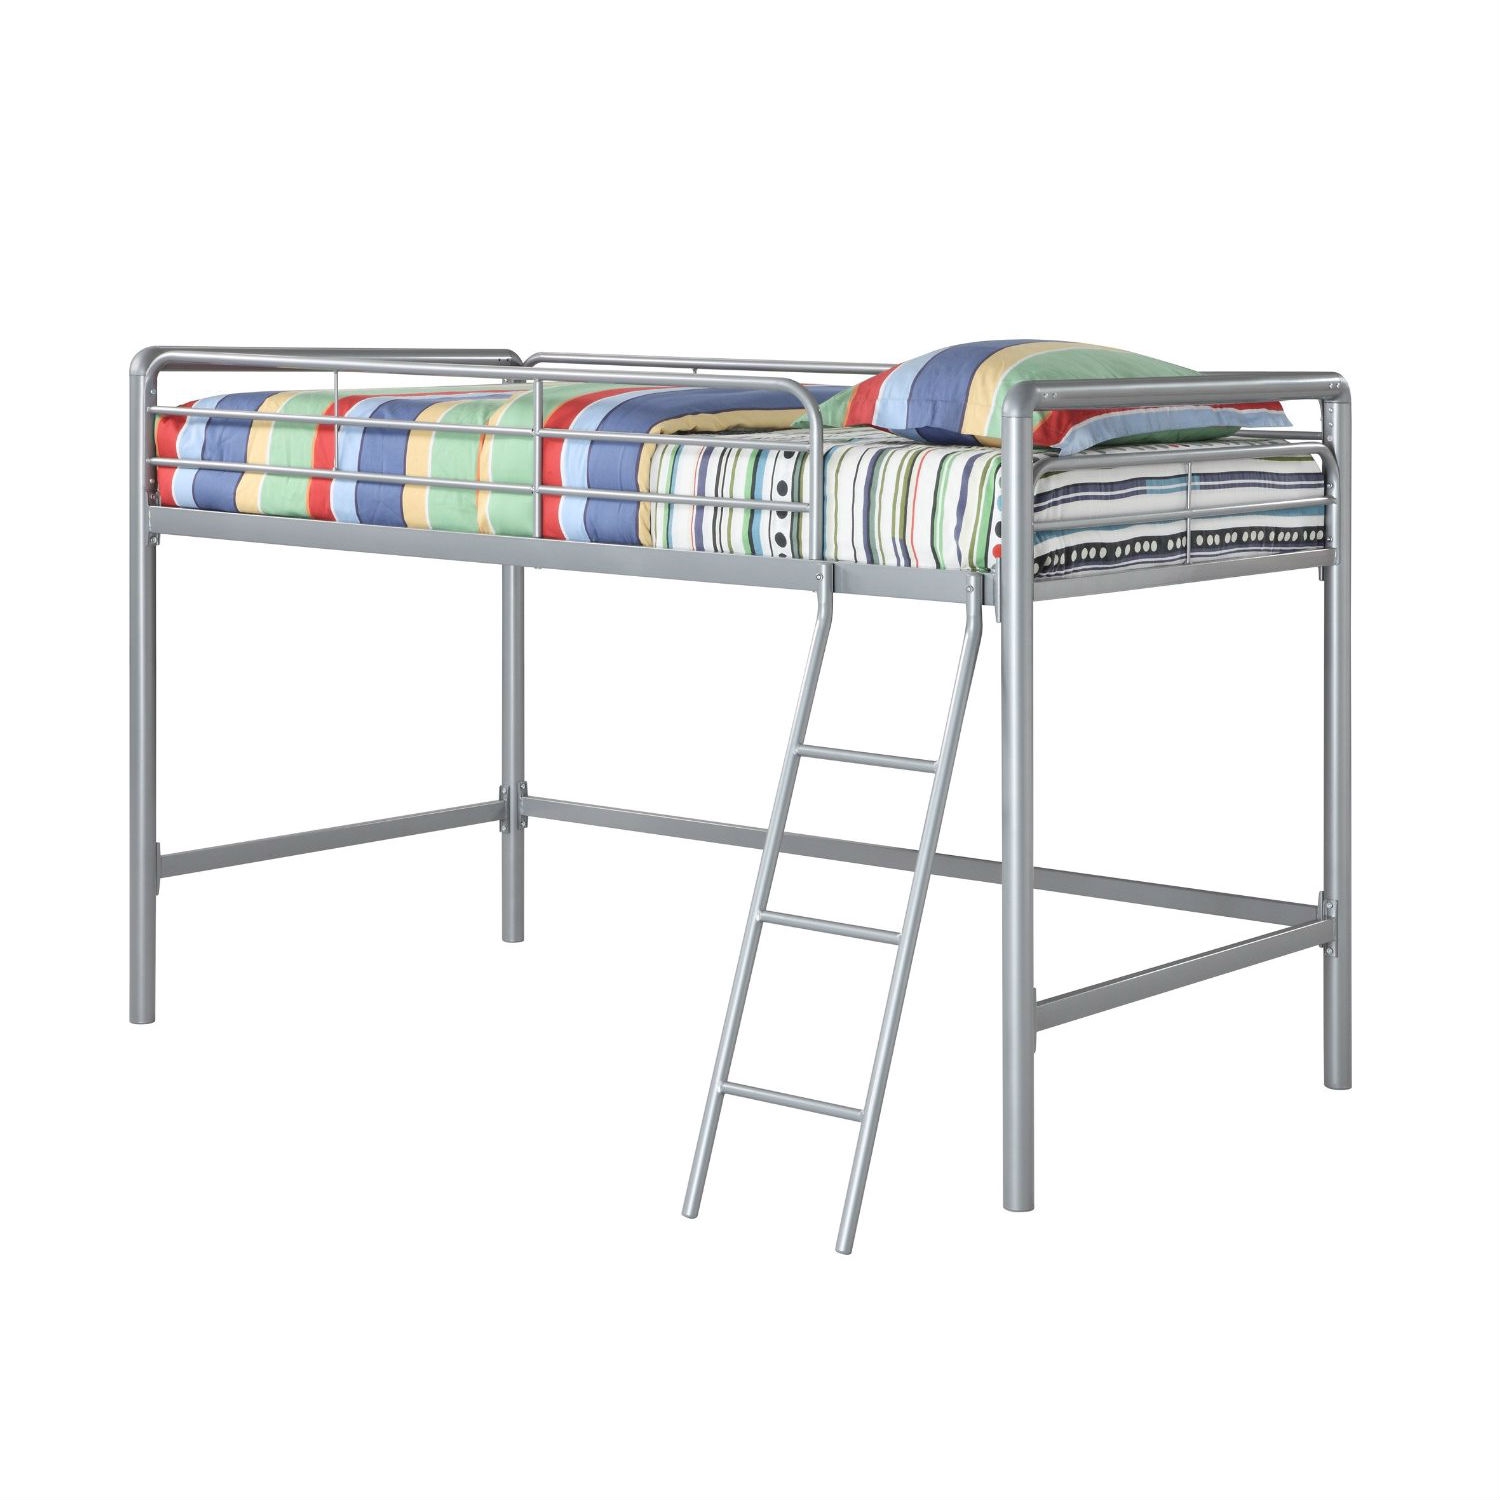 Twin size Bunk Bed Style Metal Loft Bed in Silver